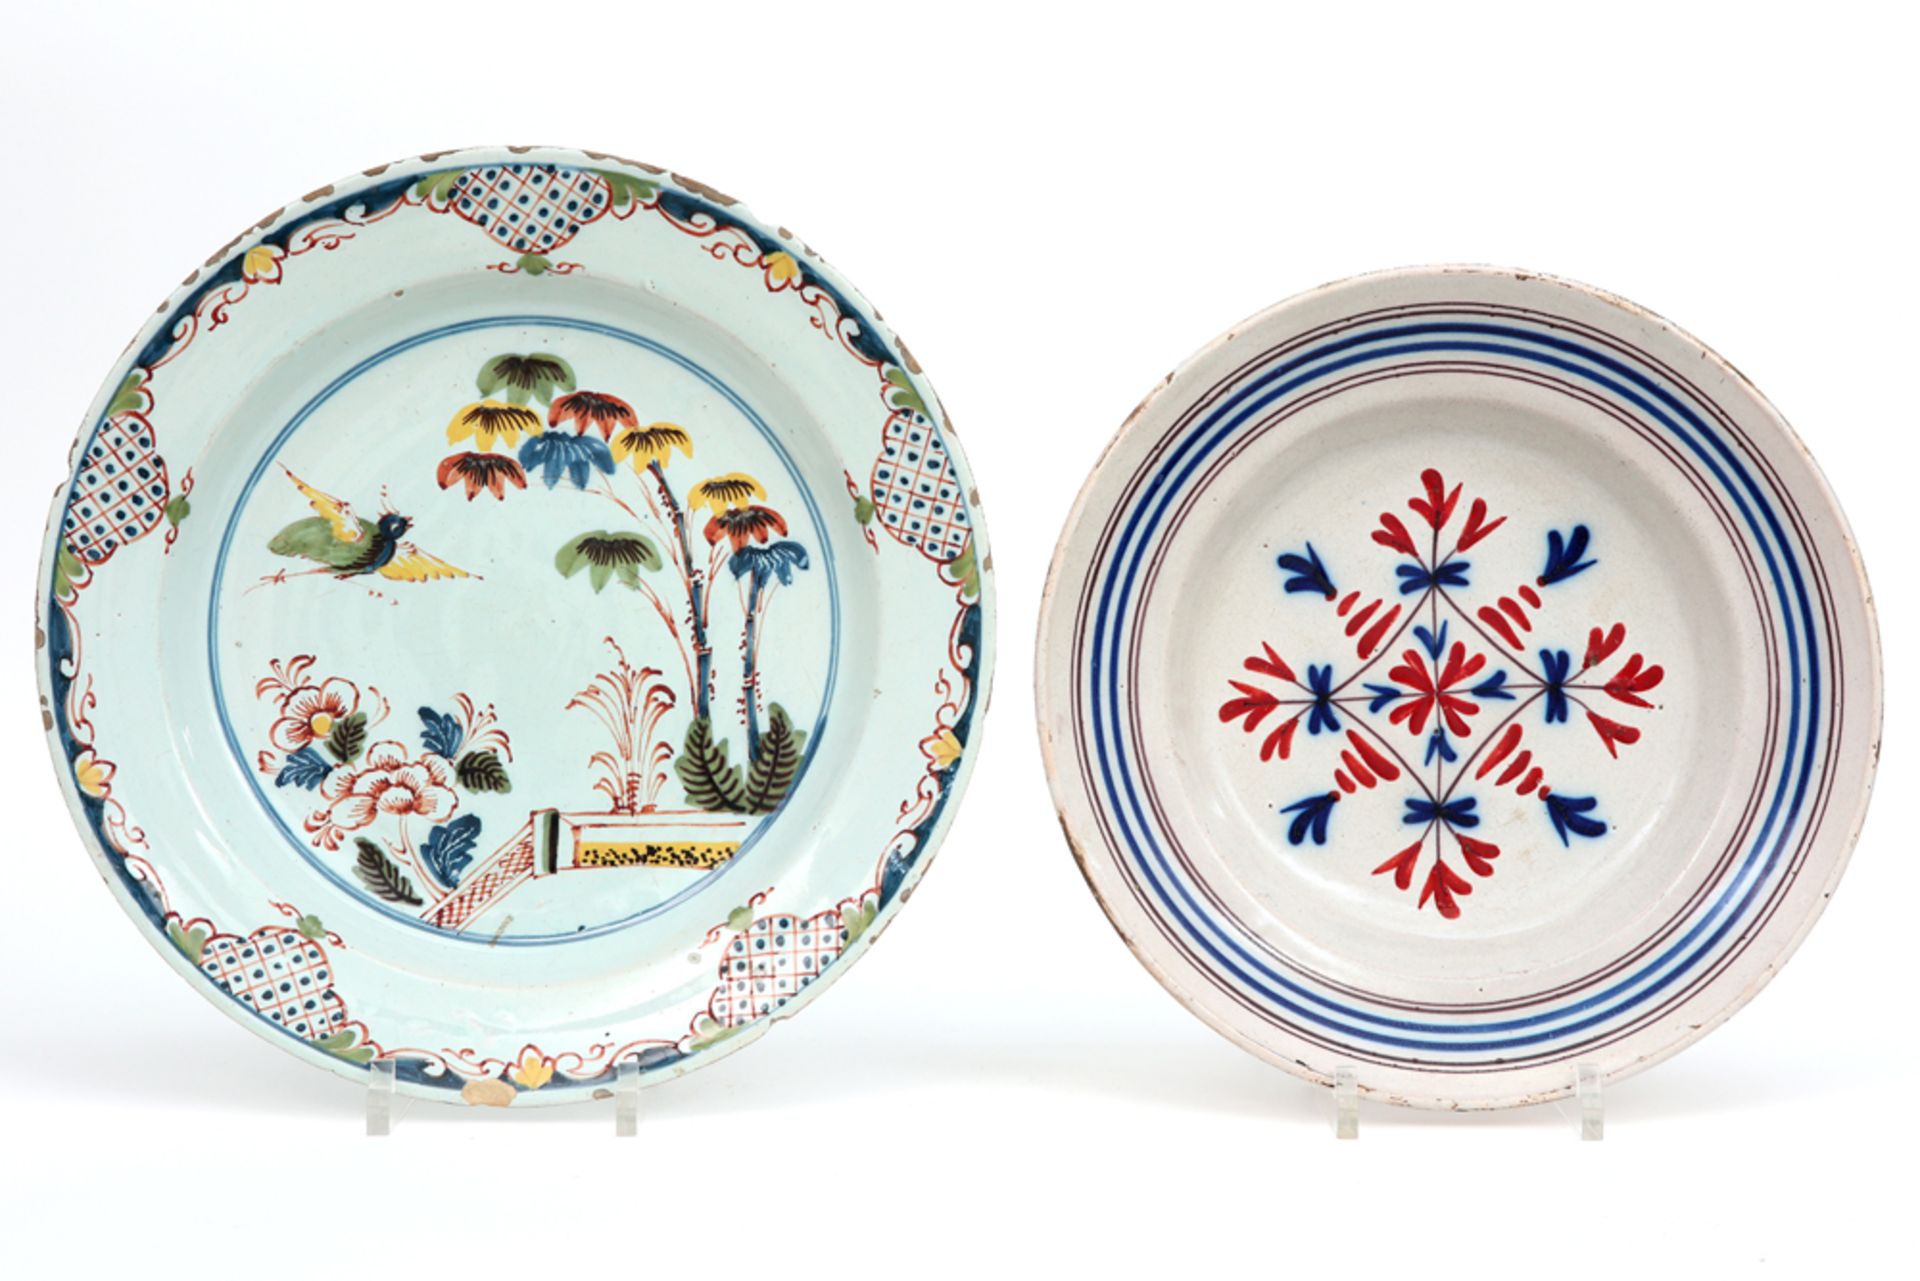 two antique dishes in earthenware, one Flemish and one from Delft || Lot van twee antieke schalen in